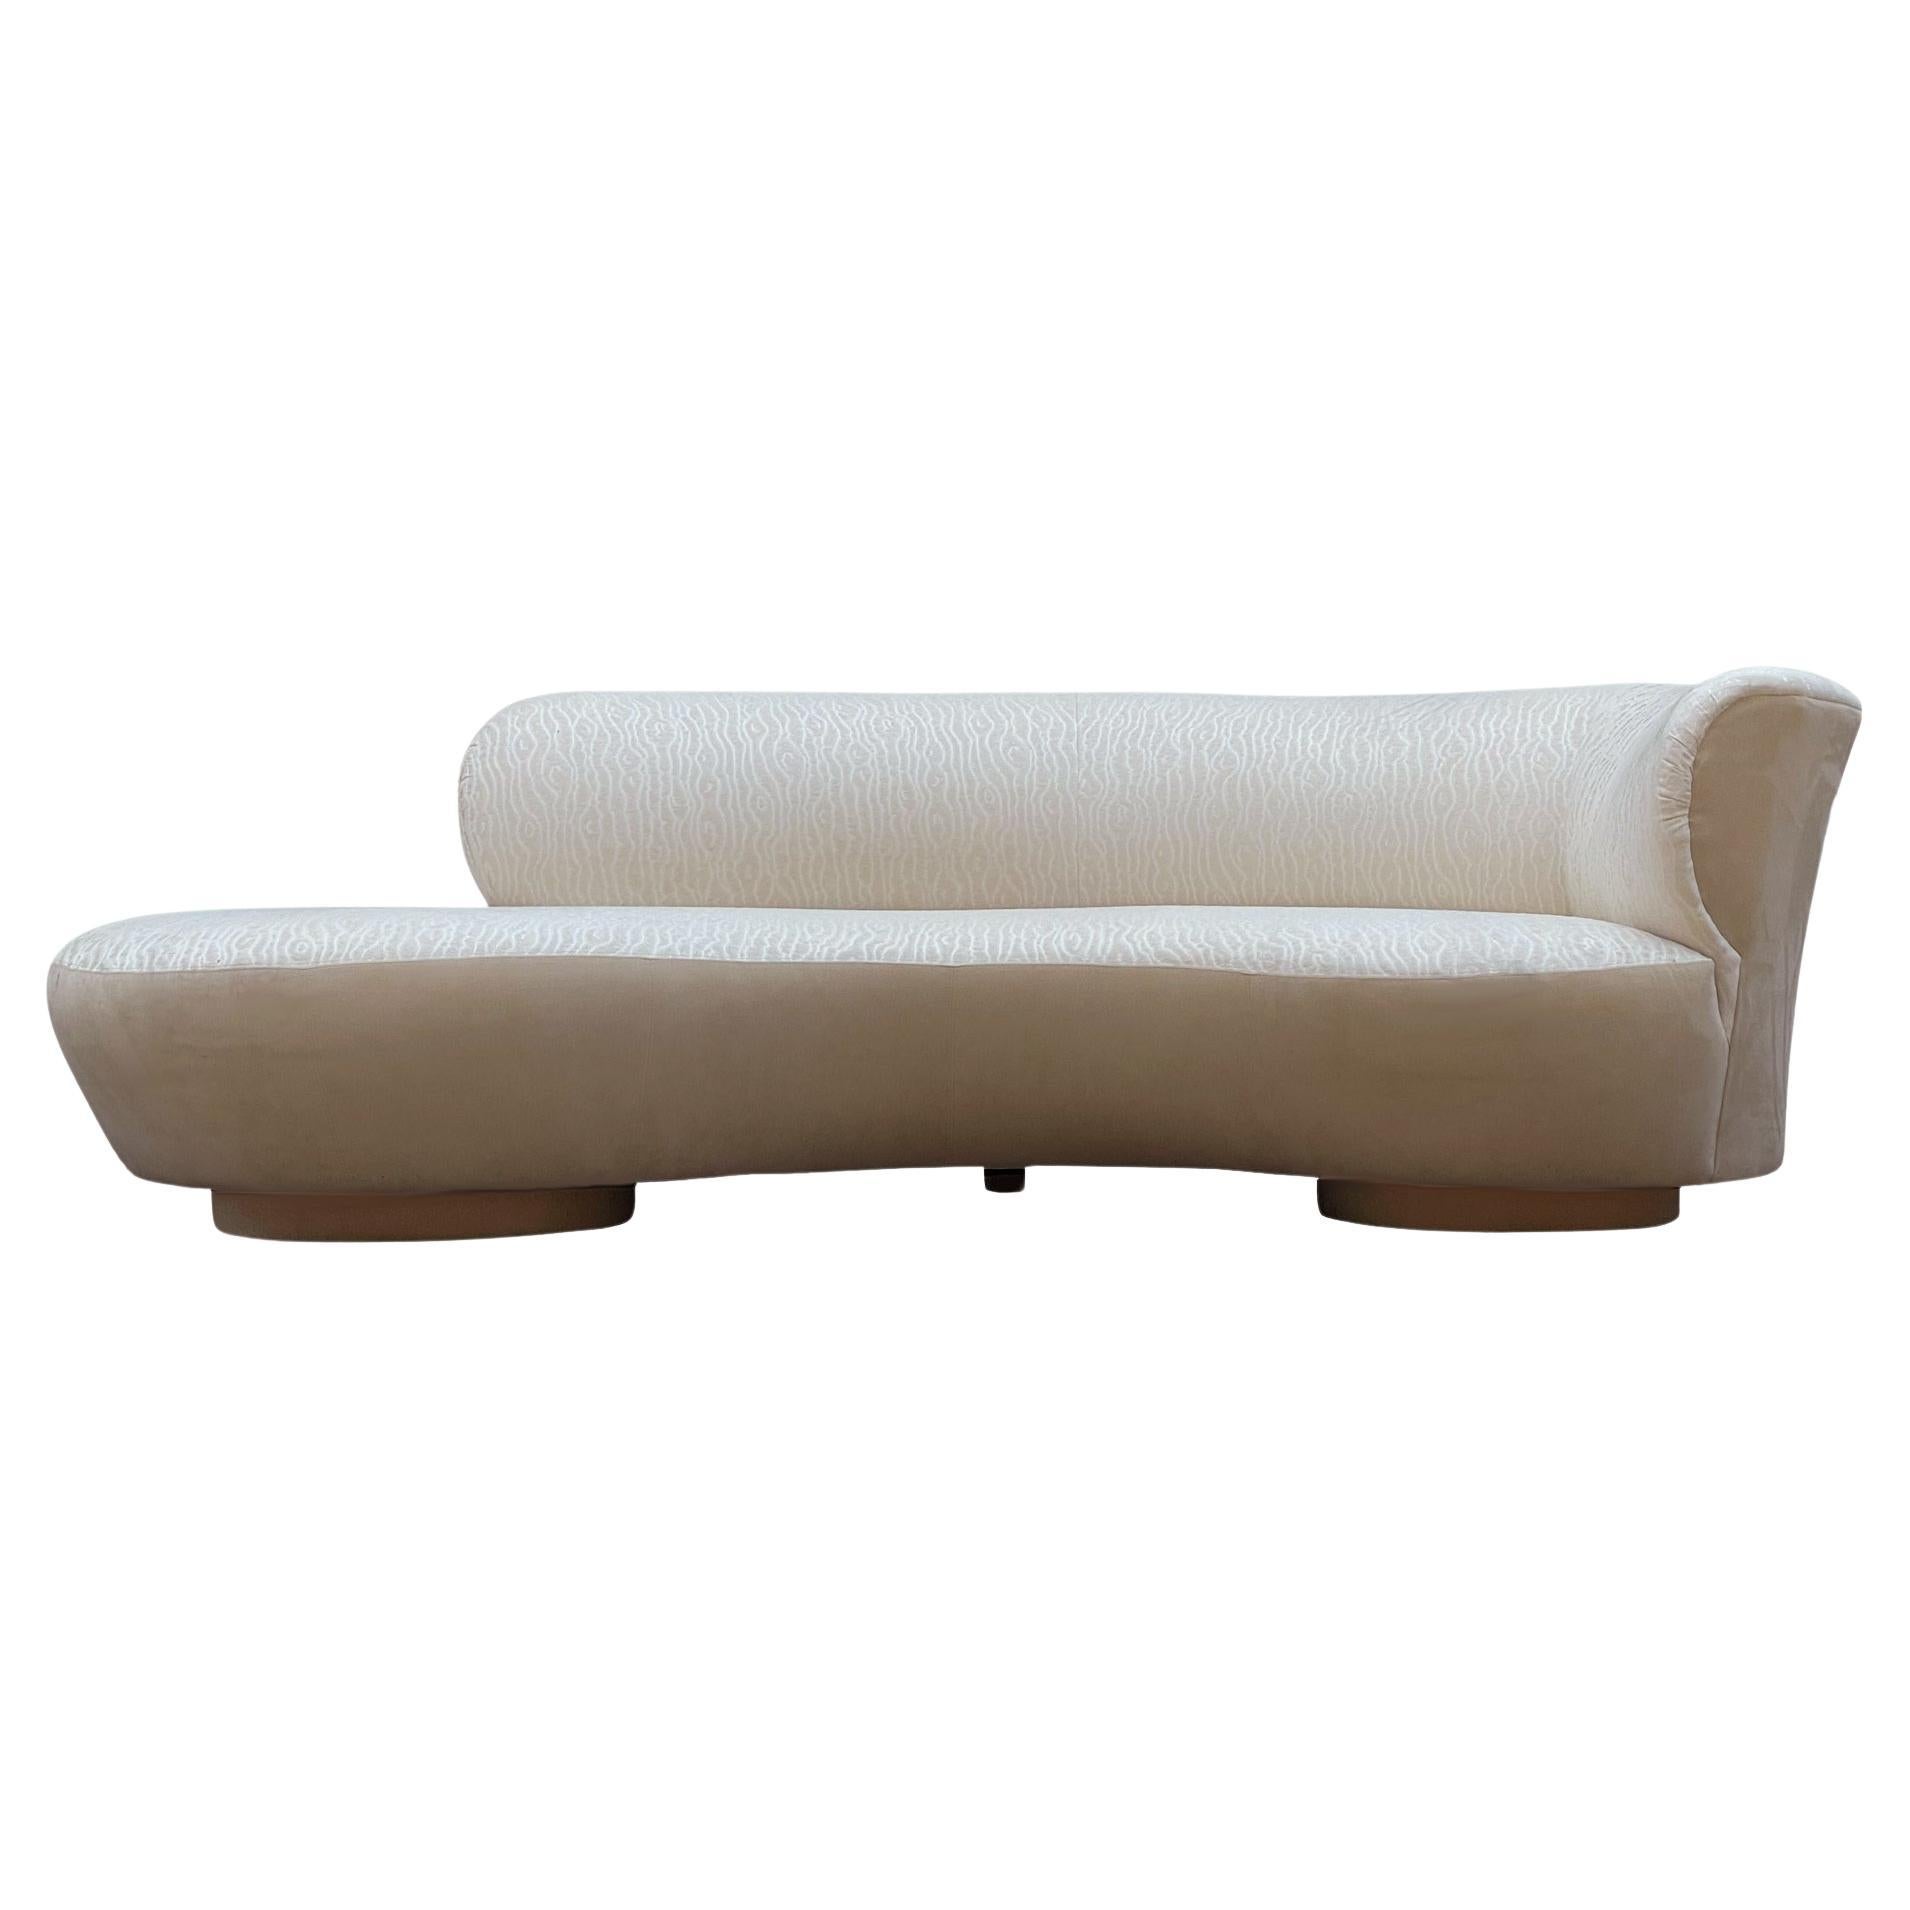 Mid Century Modern Curved Sculptural Serpentine Cloud Sofa or Chaise Lounge For Sale